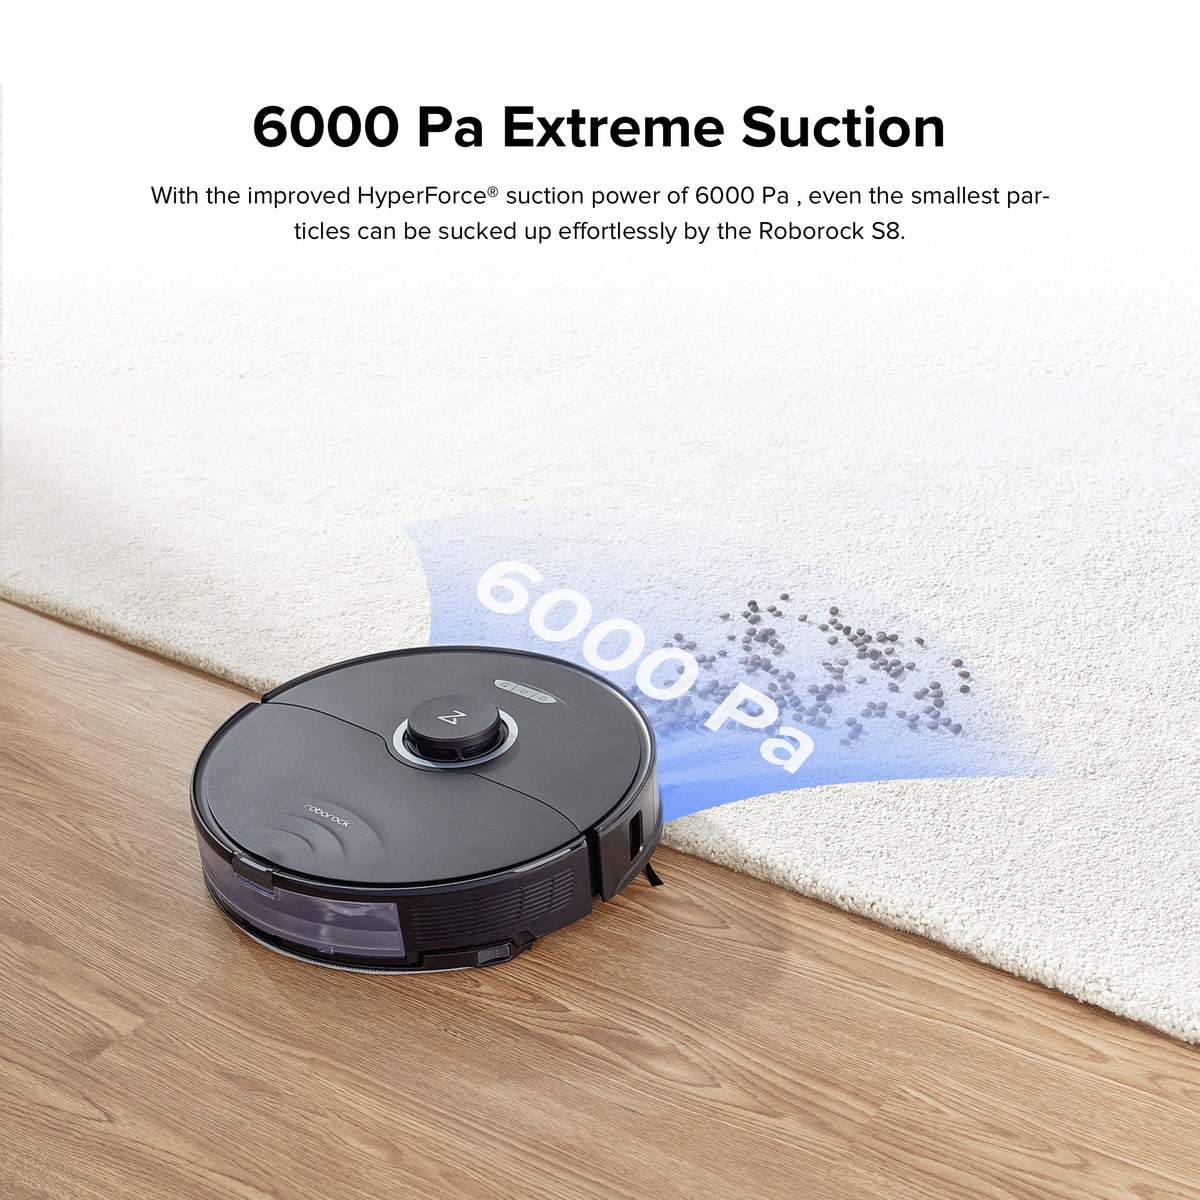 New Roborock Robot S7 Vacuum Cleaner Ultrasonic Steam Mop Sweeping Floor  Carpet Cleaner App Control With Rubber Floating Brush - Vacuum Cleaners -  AliExpress